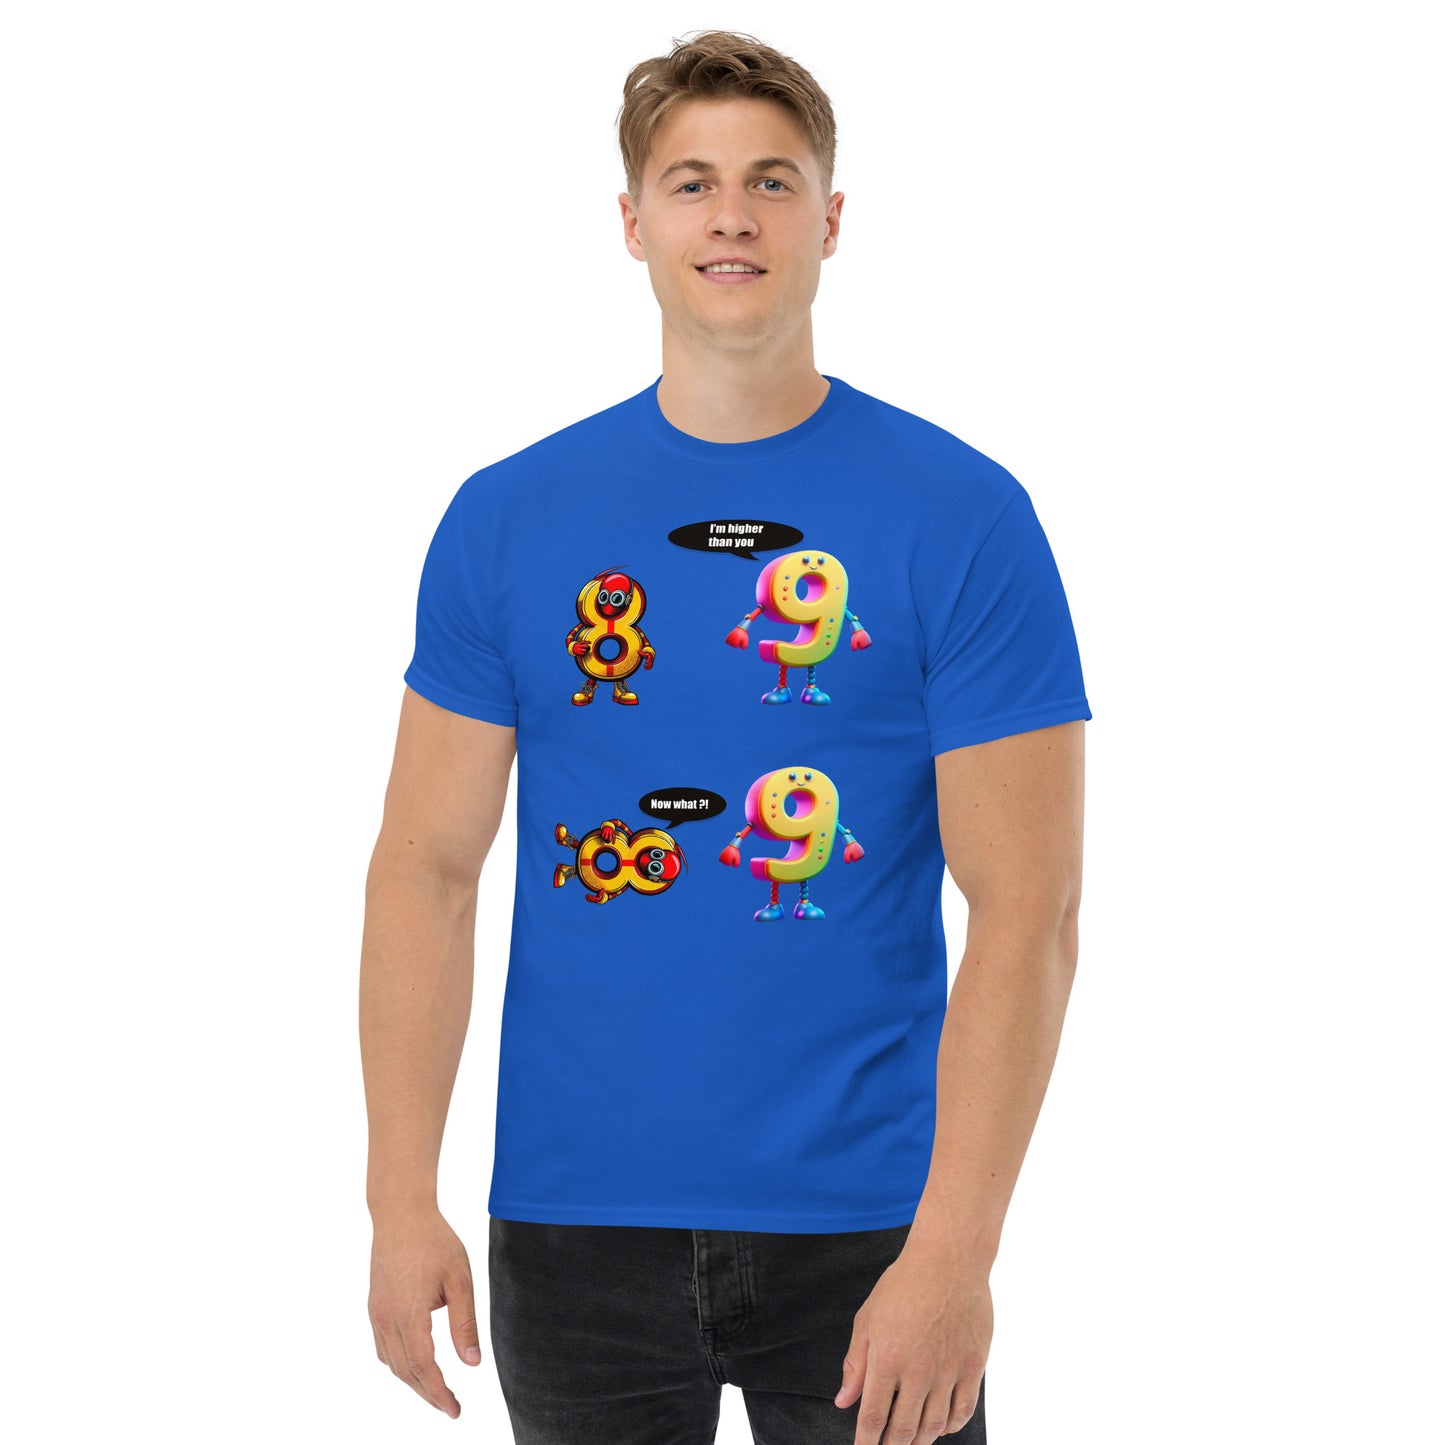 Man with royal blue t-shirt with picture of 8 and 9 having a discussion 